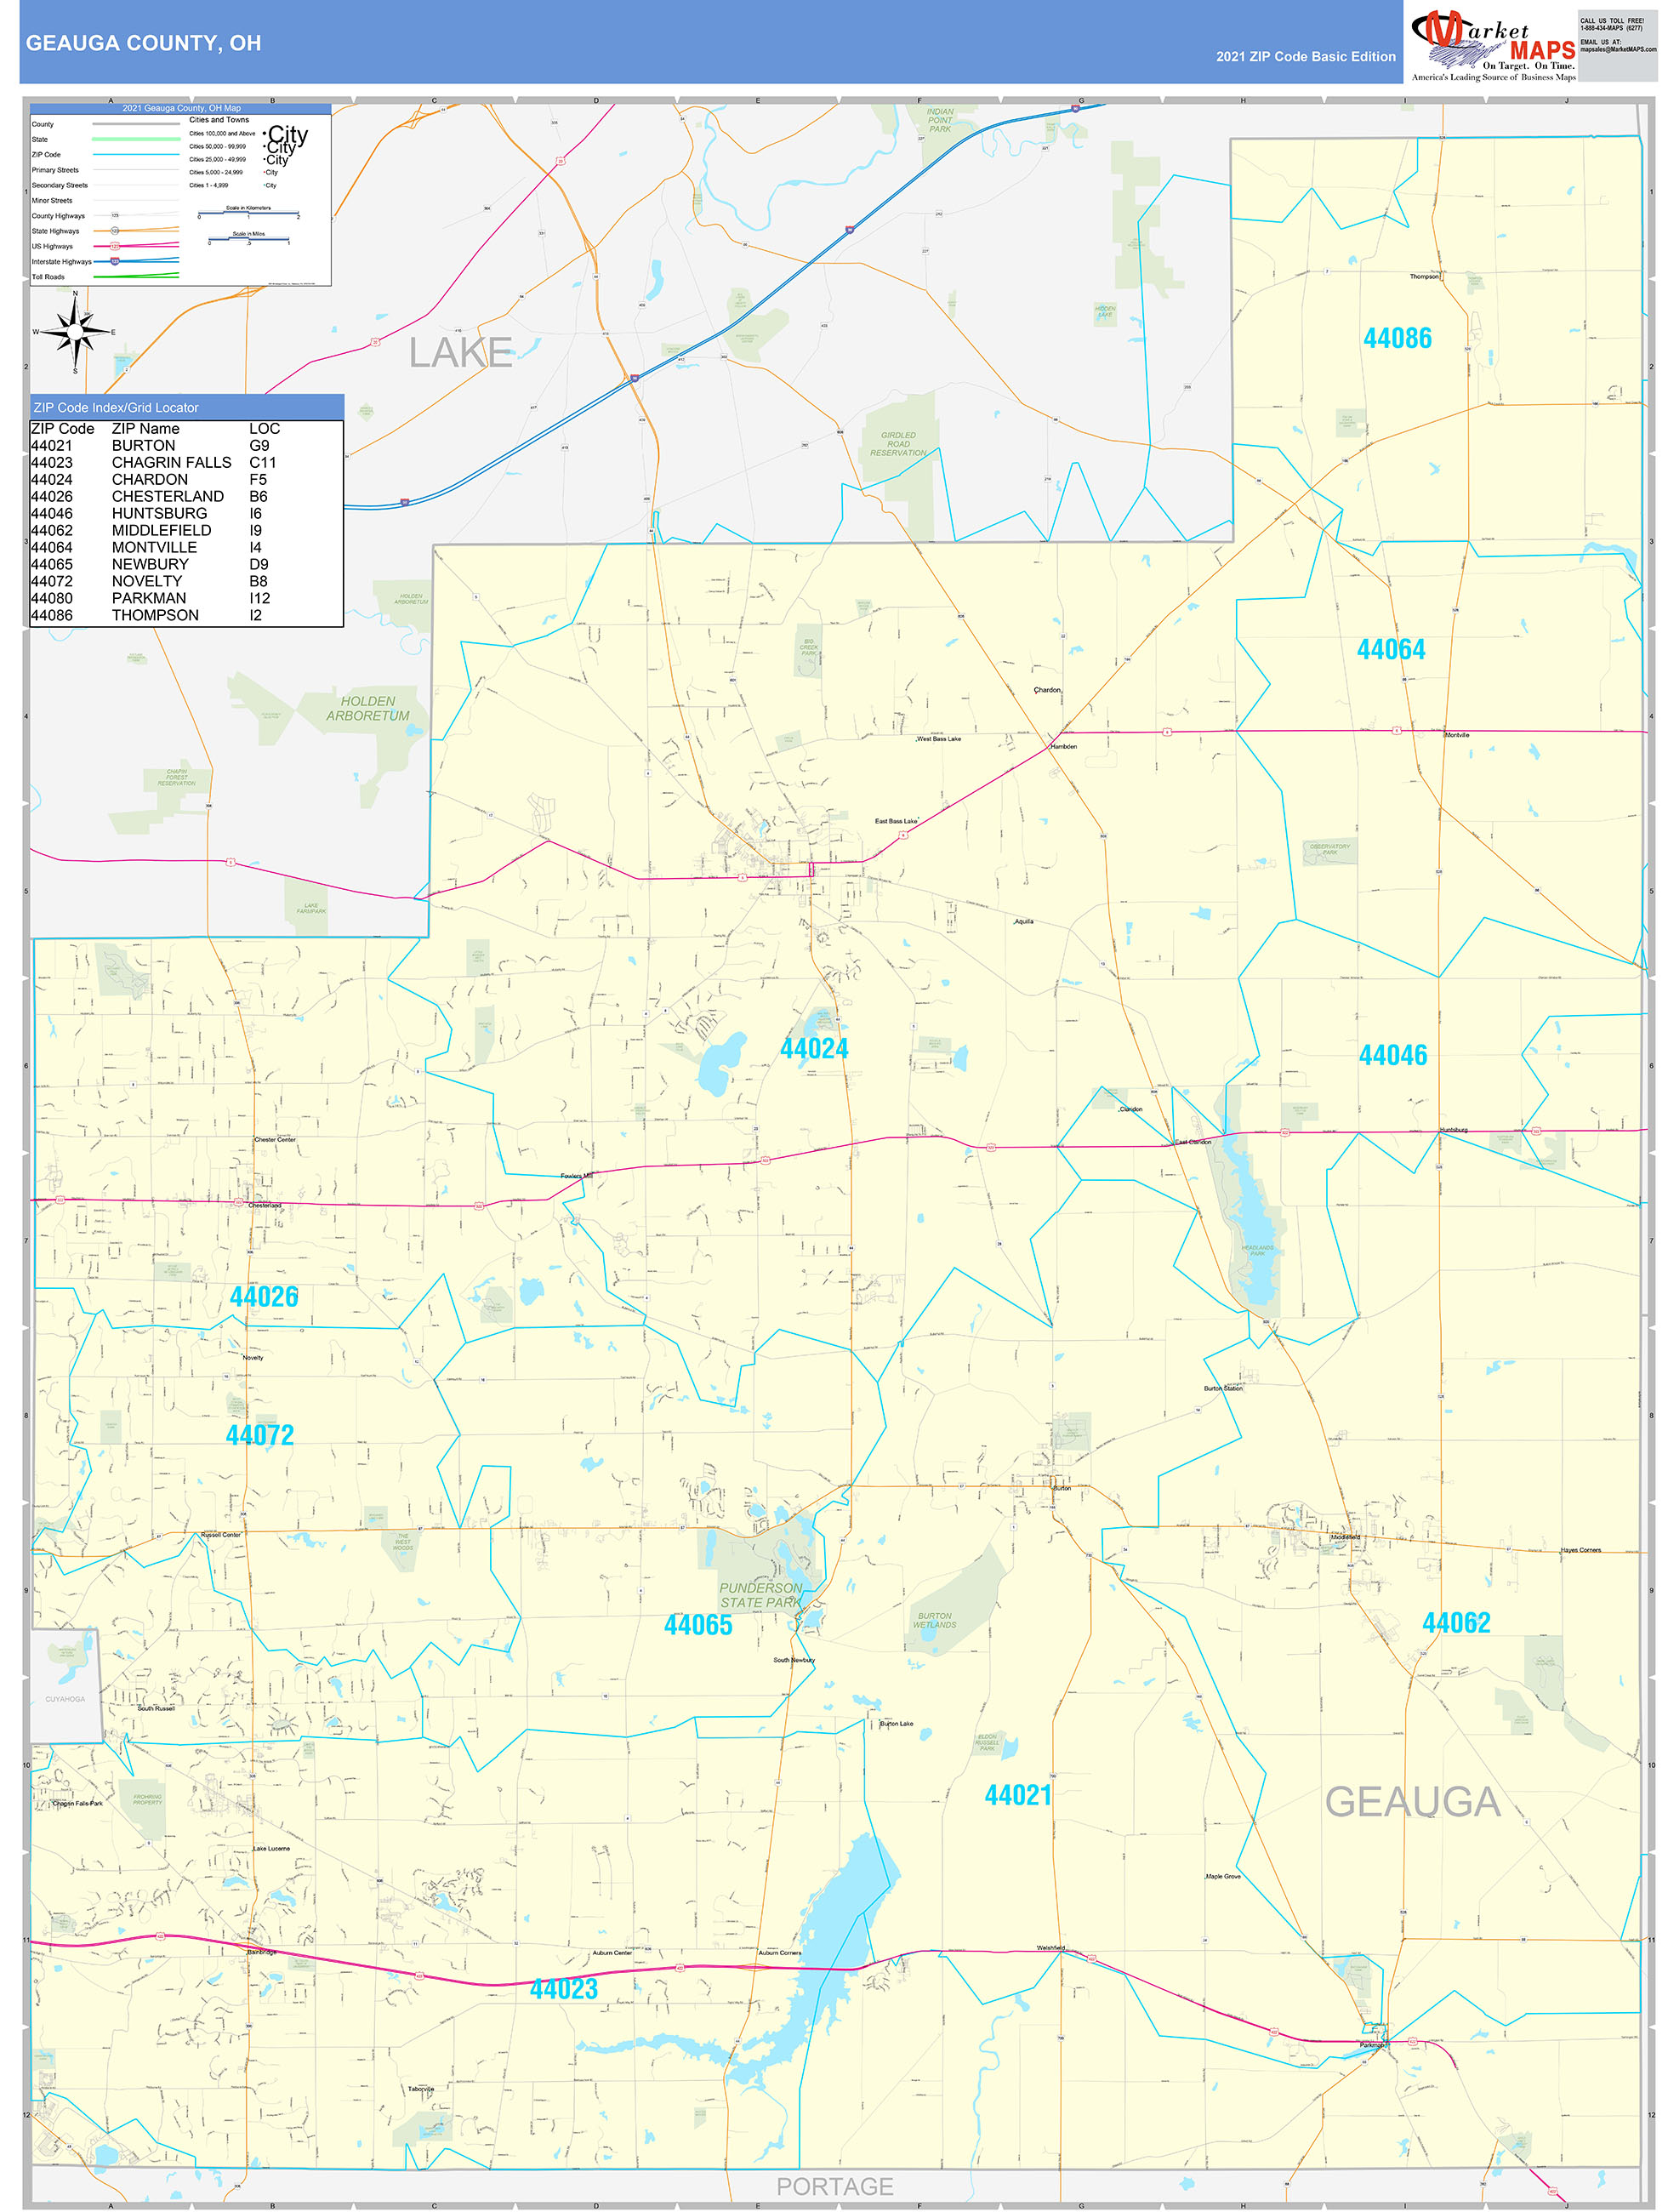 Geauga County, OH Zip Code Wall Map Basic Style by MarketMAPS MapSales